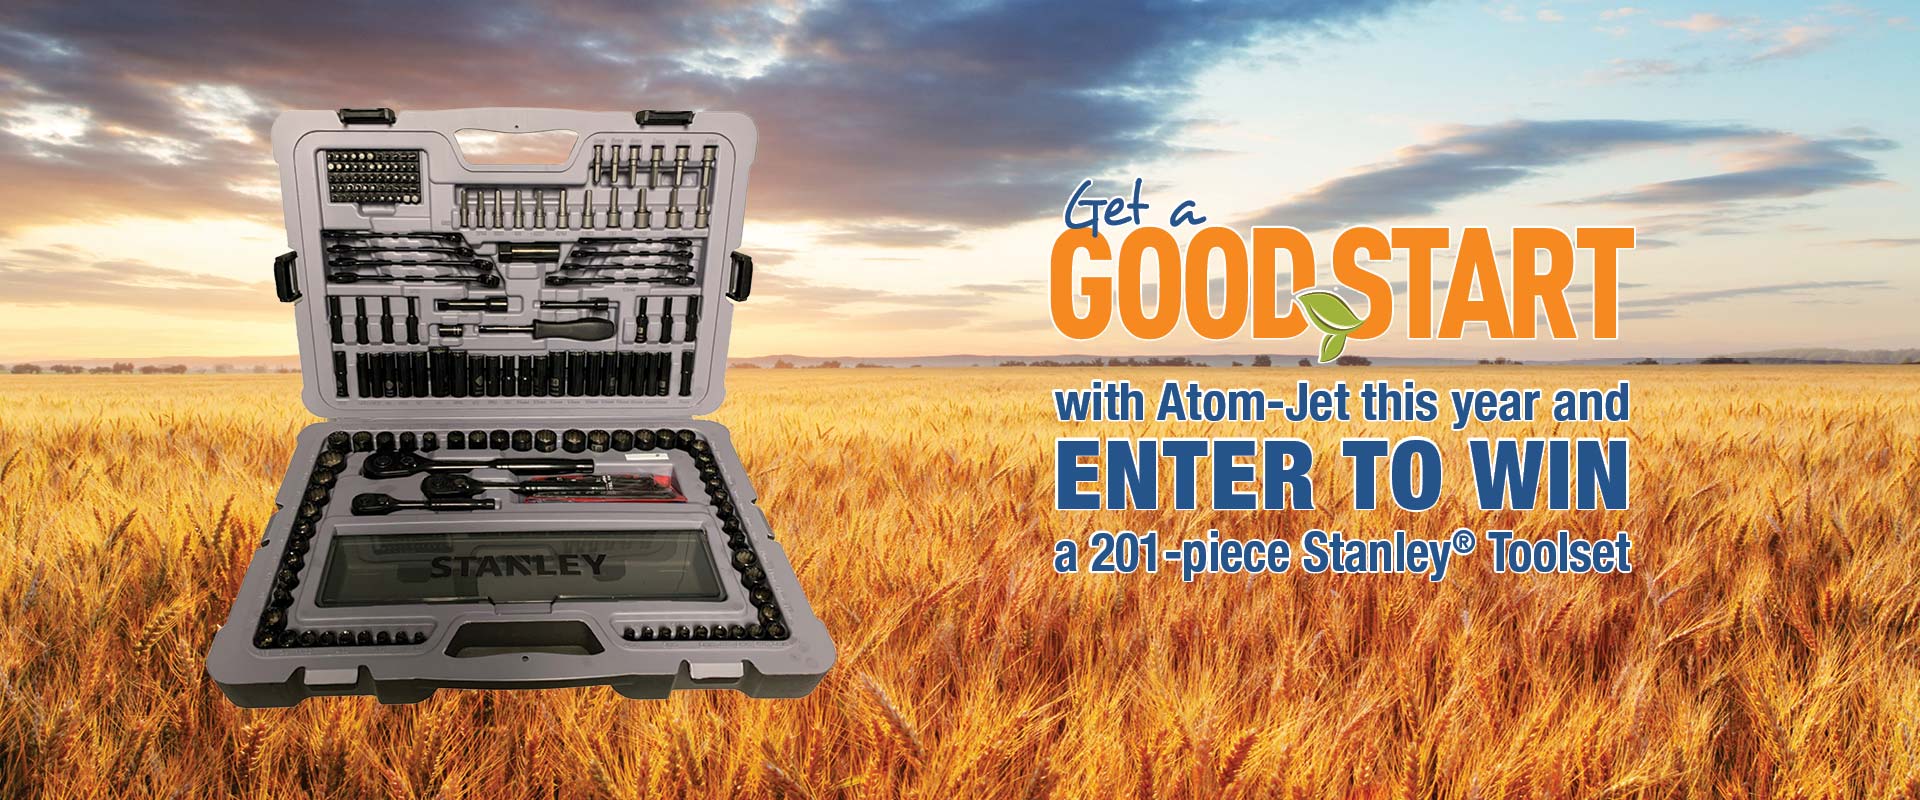 Get a Good Start with Atom-Jet this year. Enter to win a 201-piece Stanley® Toolset